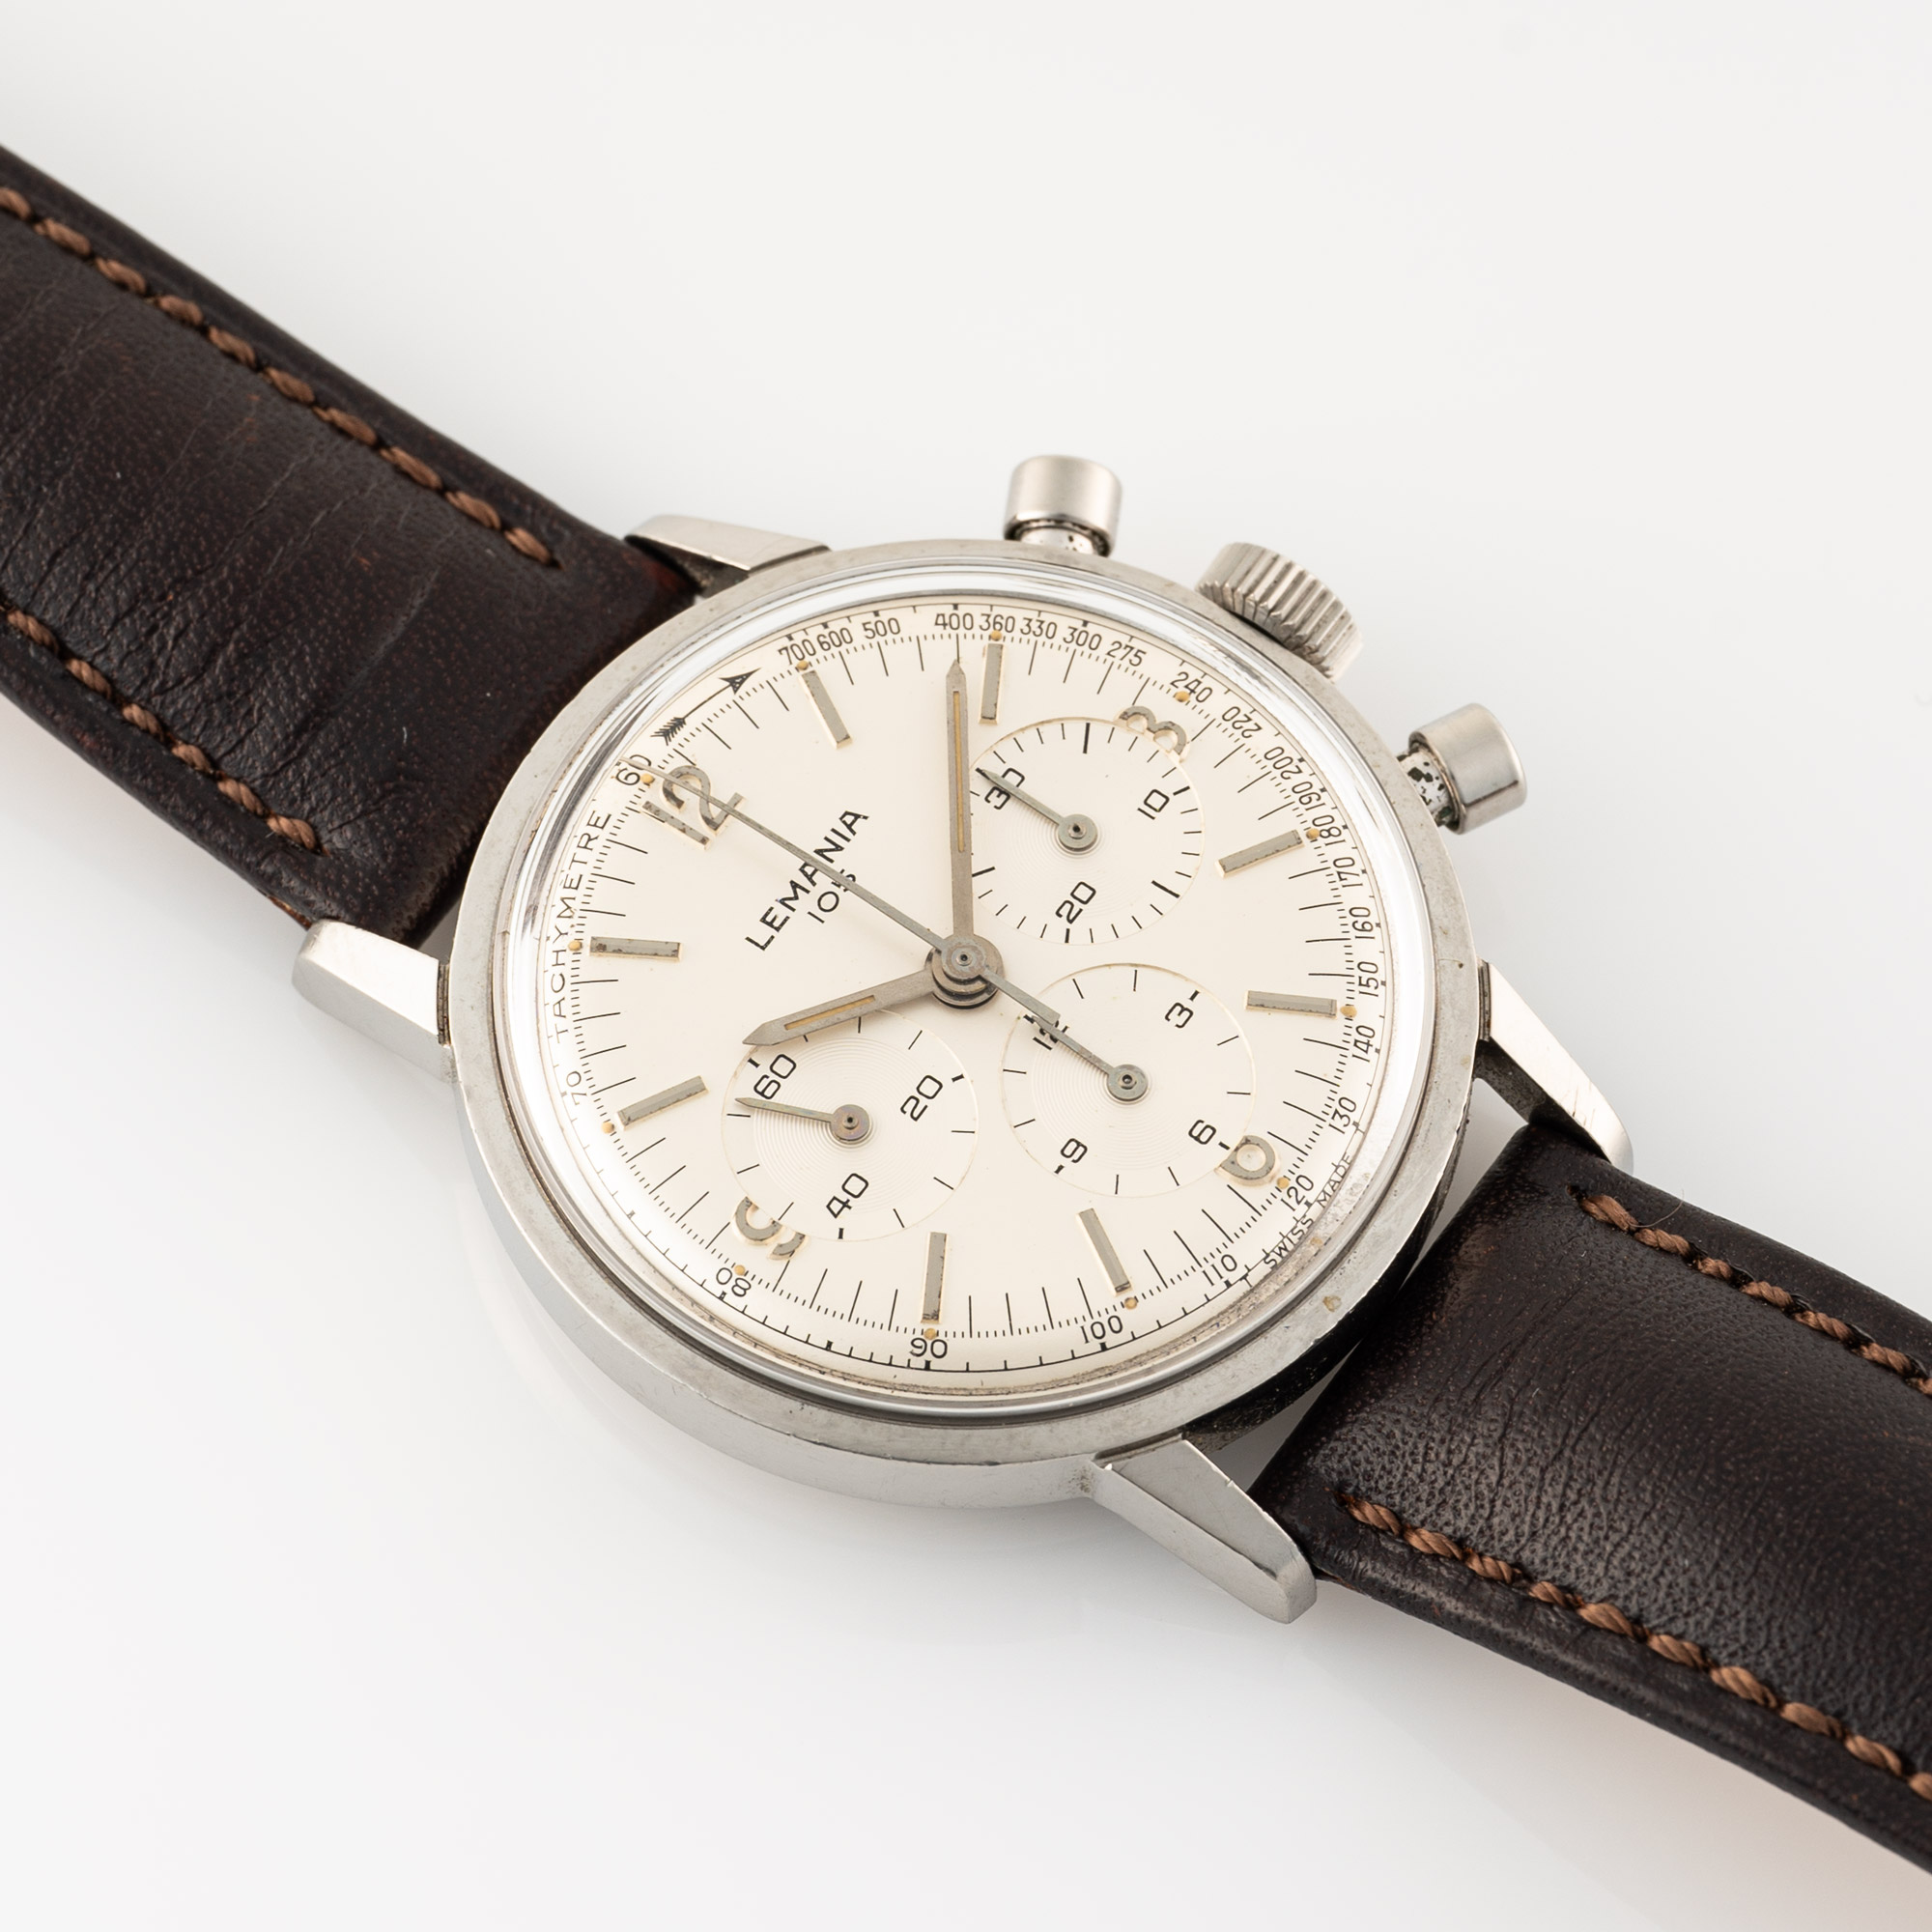 A RARE GENTLEMAN'S STAINLESS STEEL LEMANIA WATERPROOF CHRONOGRAPH WRIST WATCH CIRCA 1960s, ISSUED TO - Image 6 of 10